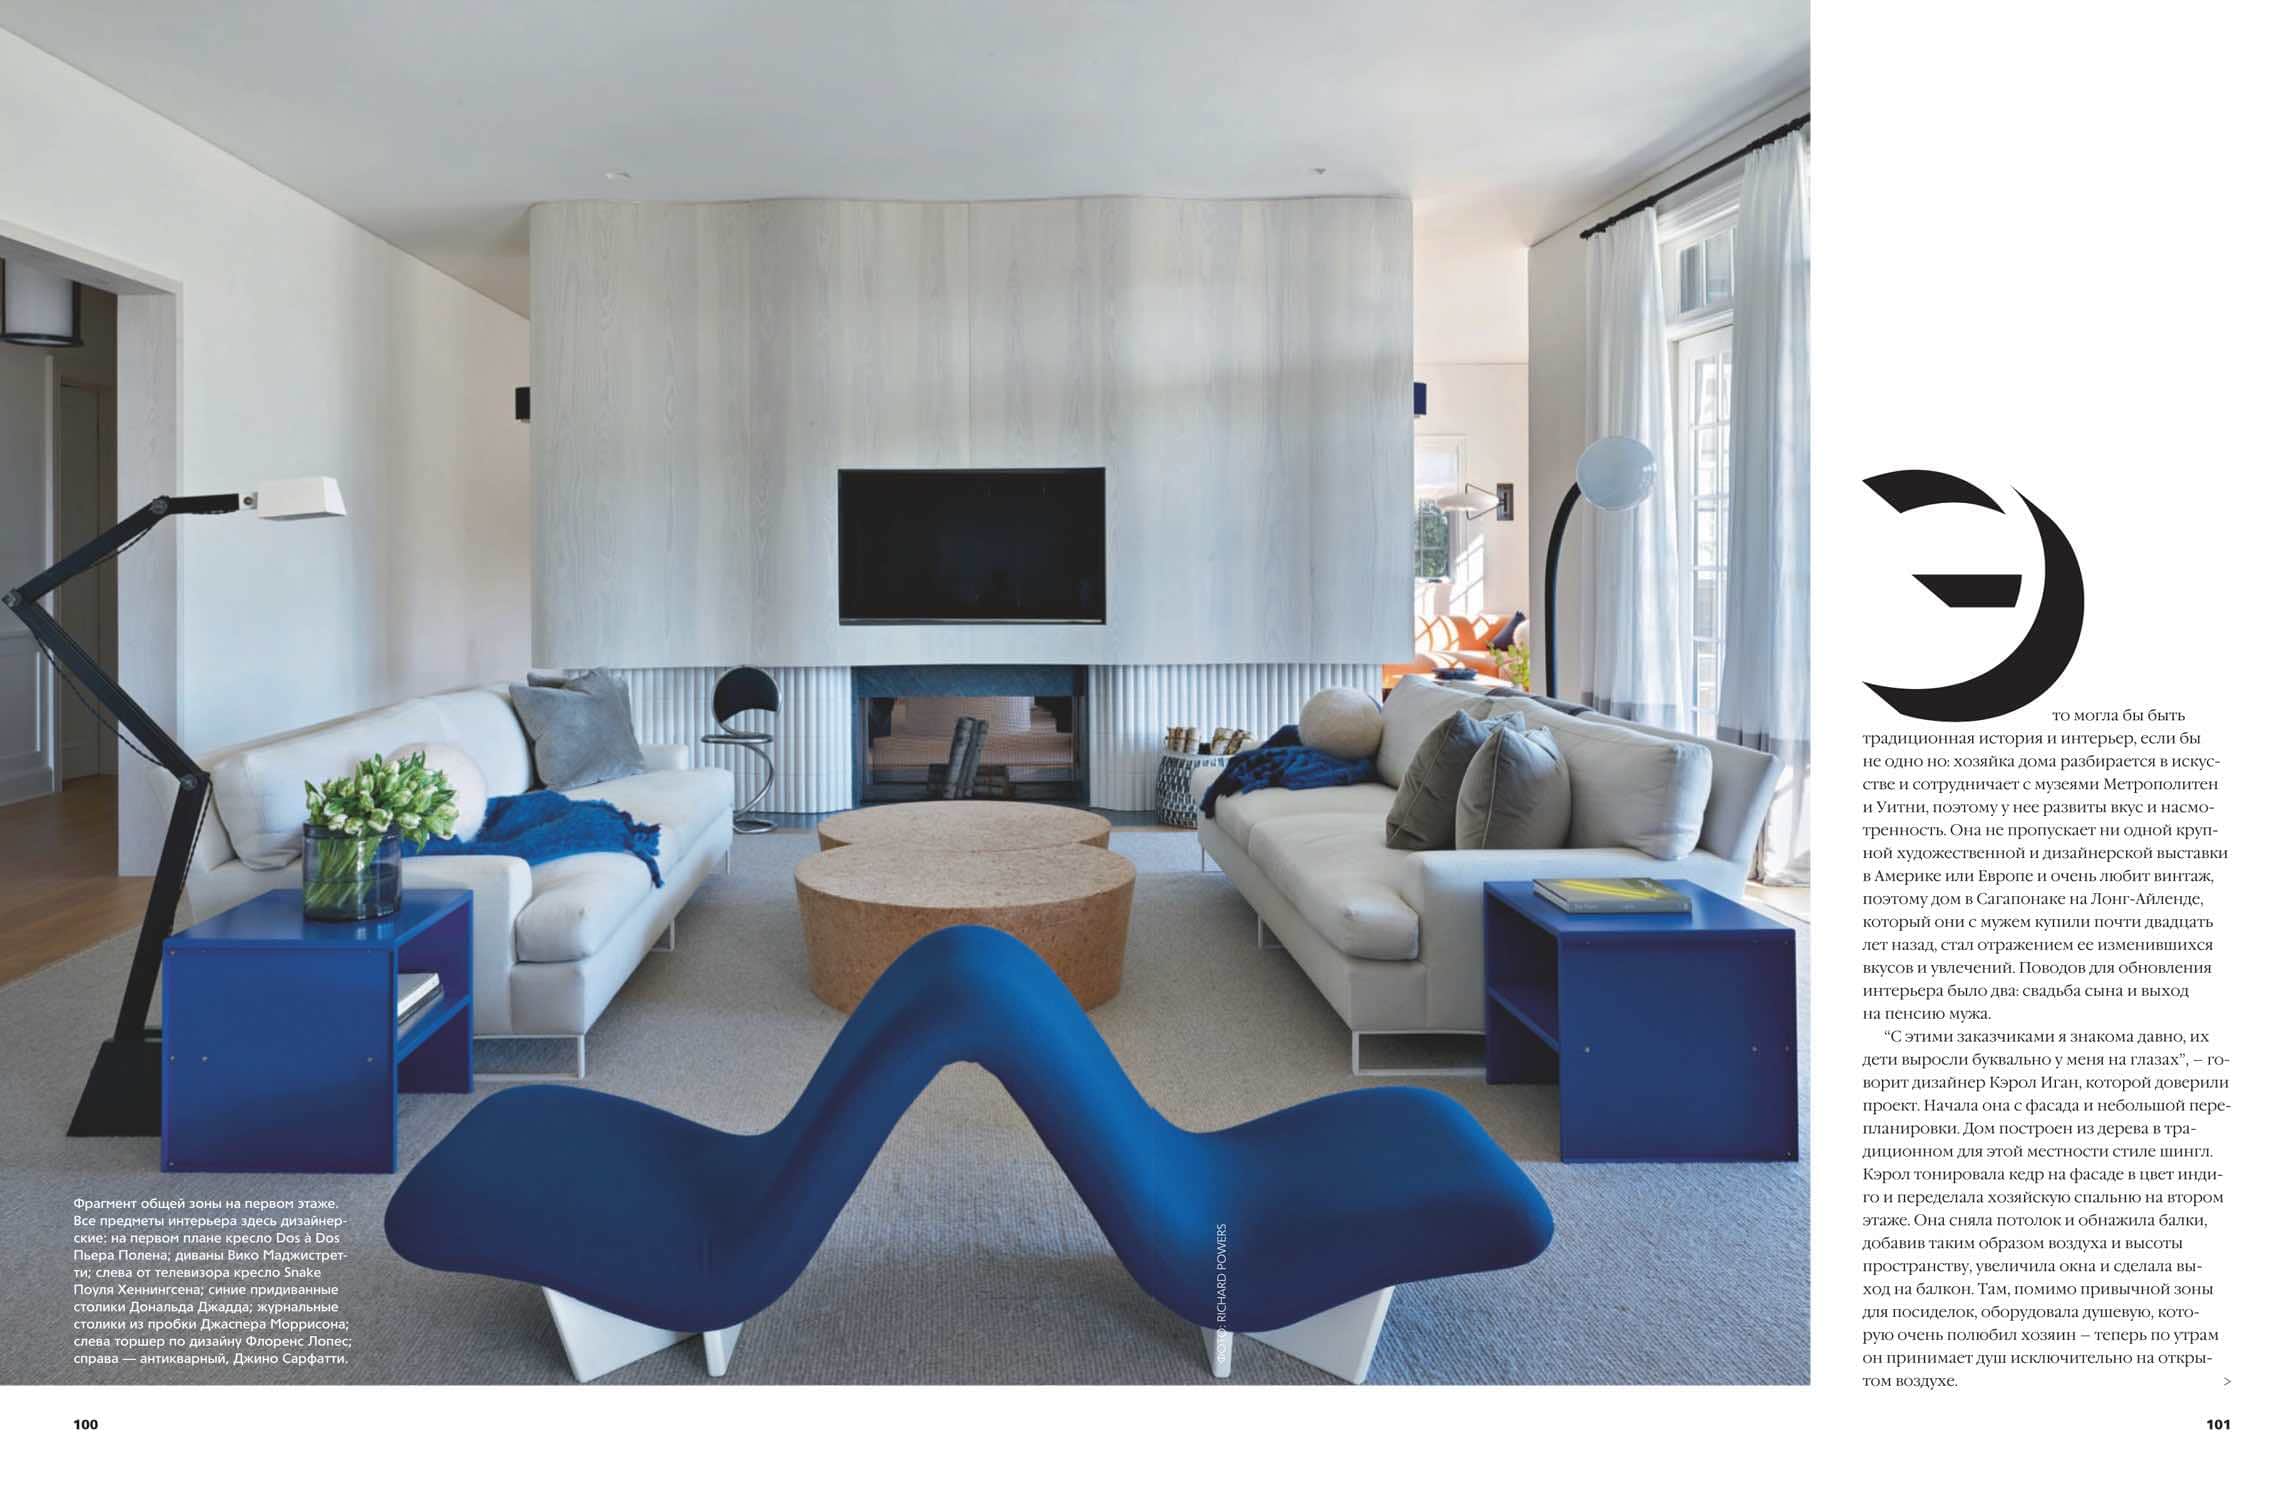 Designed by Carol Egan Interiors, living room with Dos a Dos banquette by Pierre Paulin, side tables by Donald Judd, raffles sofa by Vico Magistretti and custom cork series coffee table by Jasper Morrison.